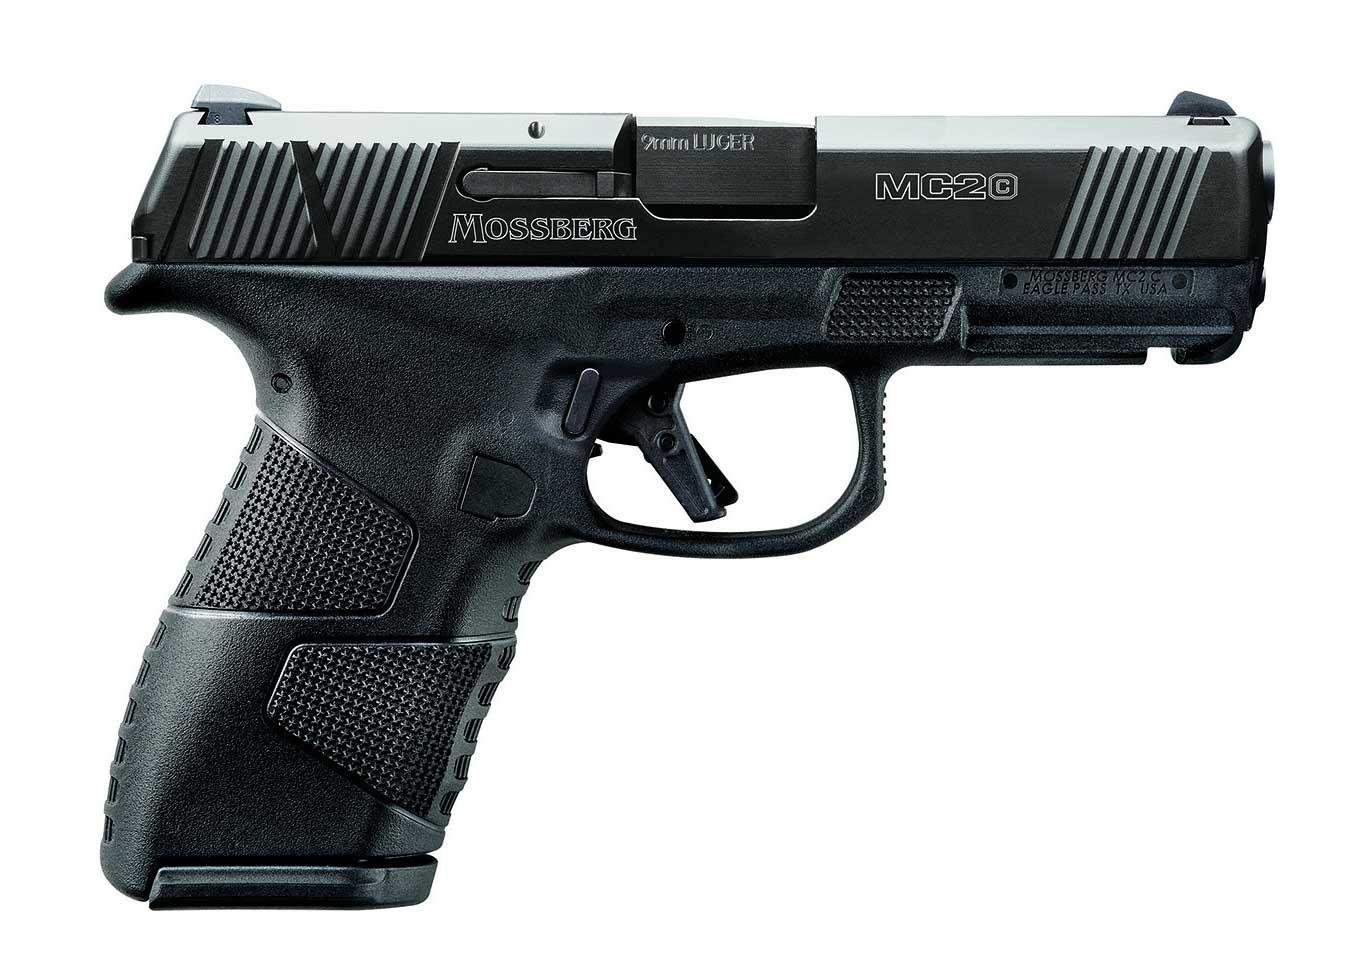 MOSSBERG MC2c 9mm 3.9in Black 15rd - $397.99 (Free S/H on Firearms)